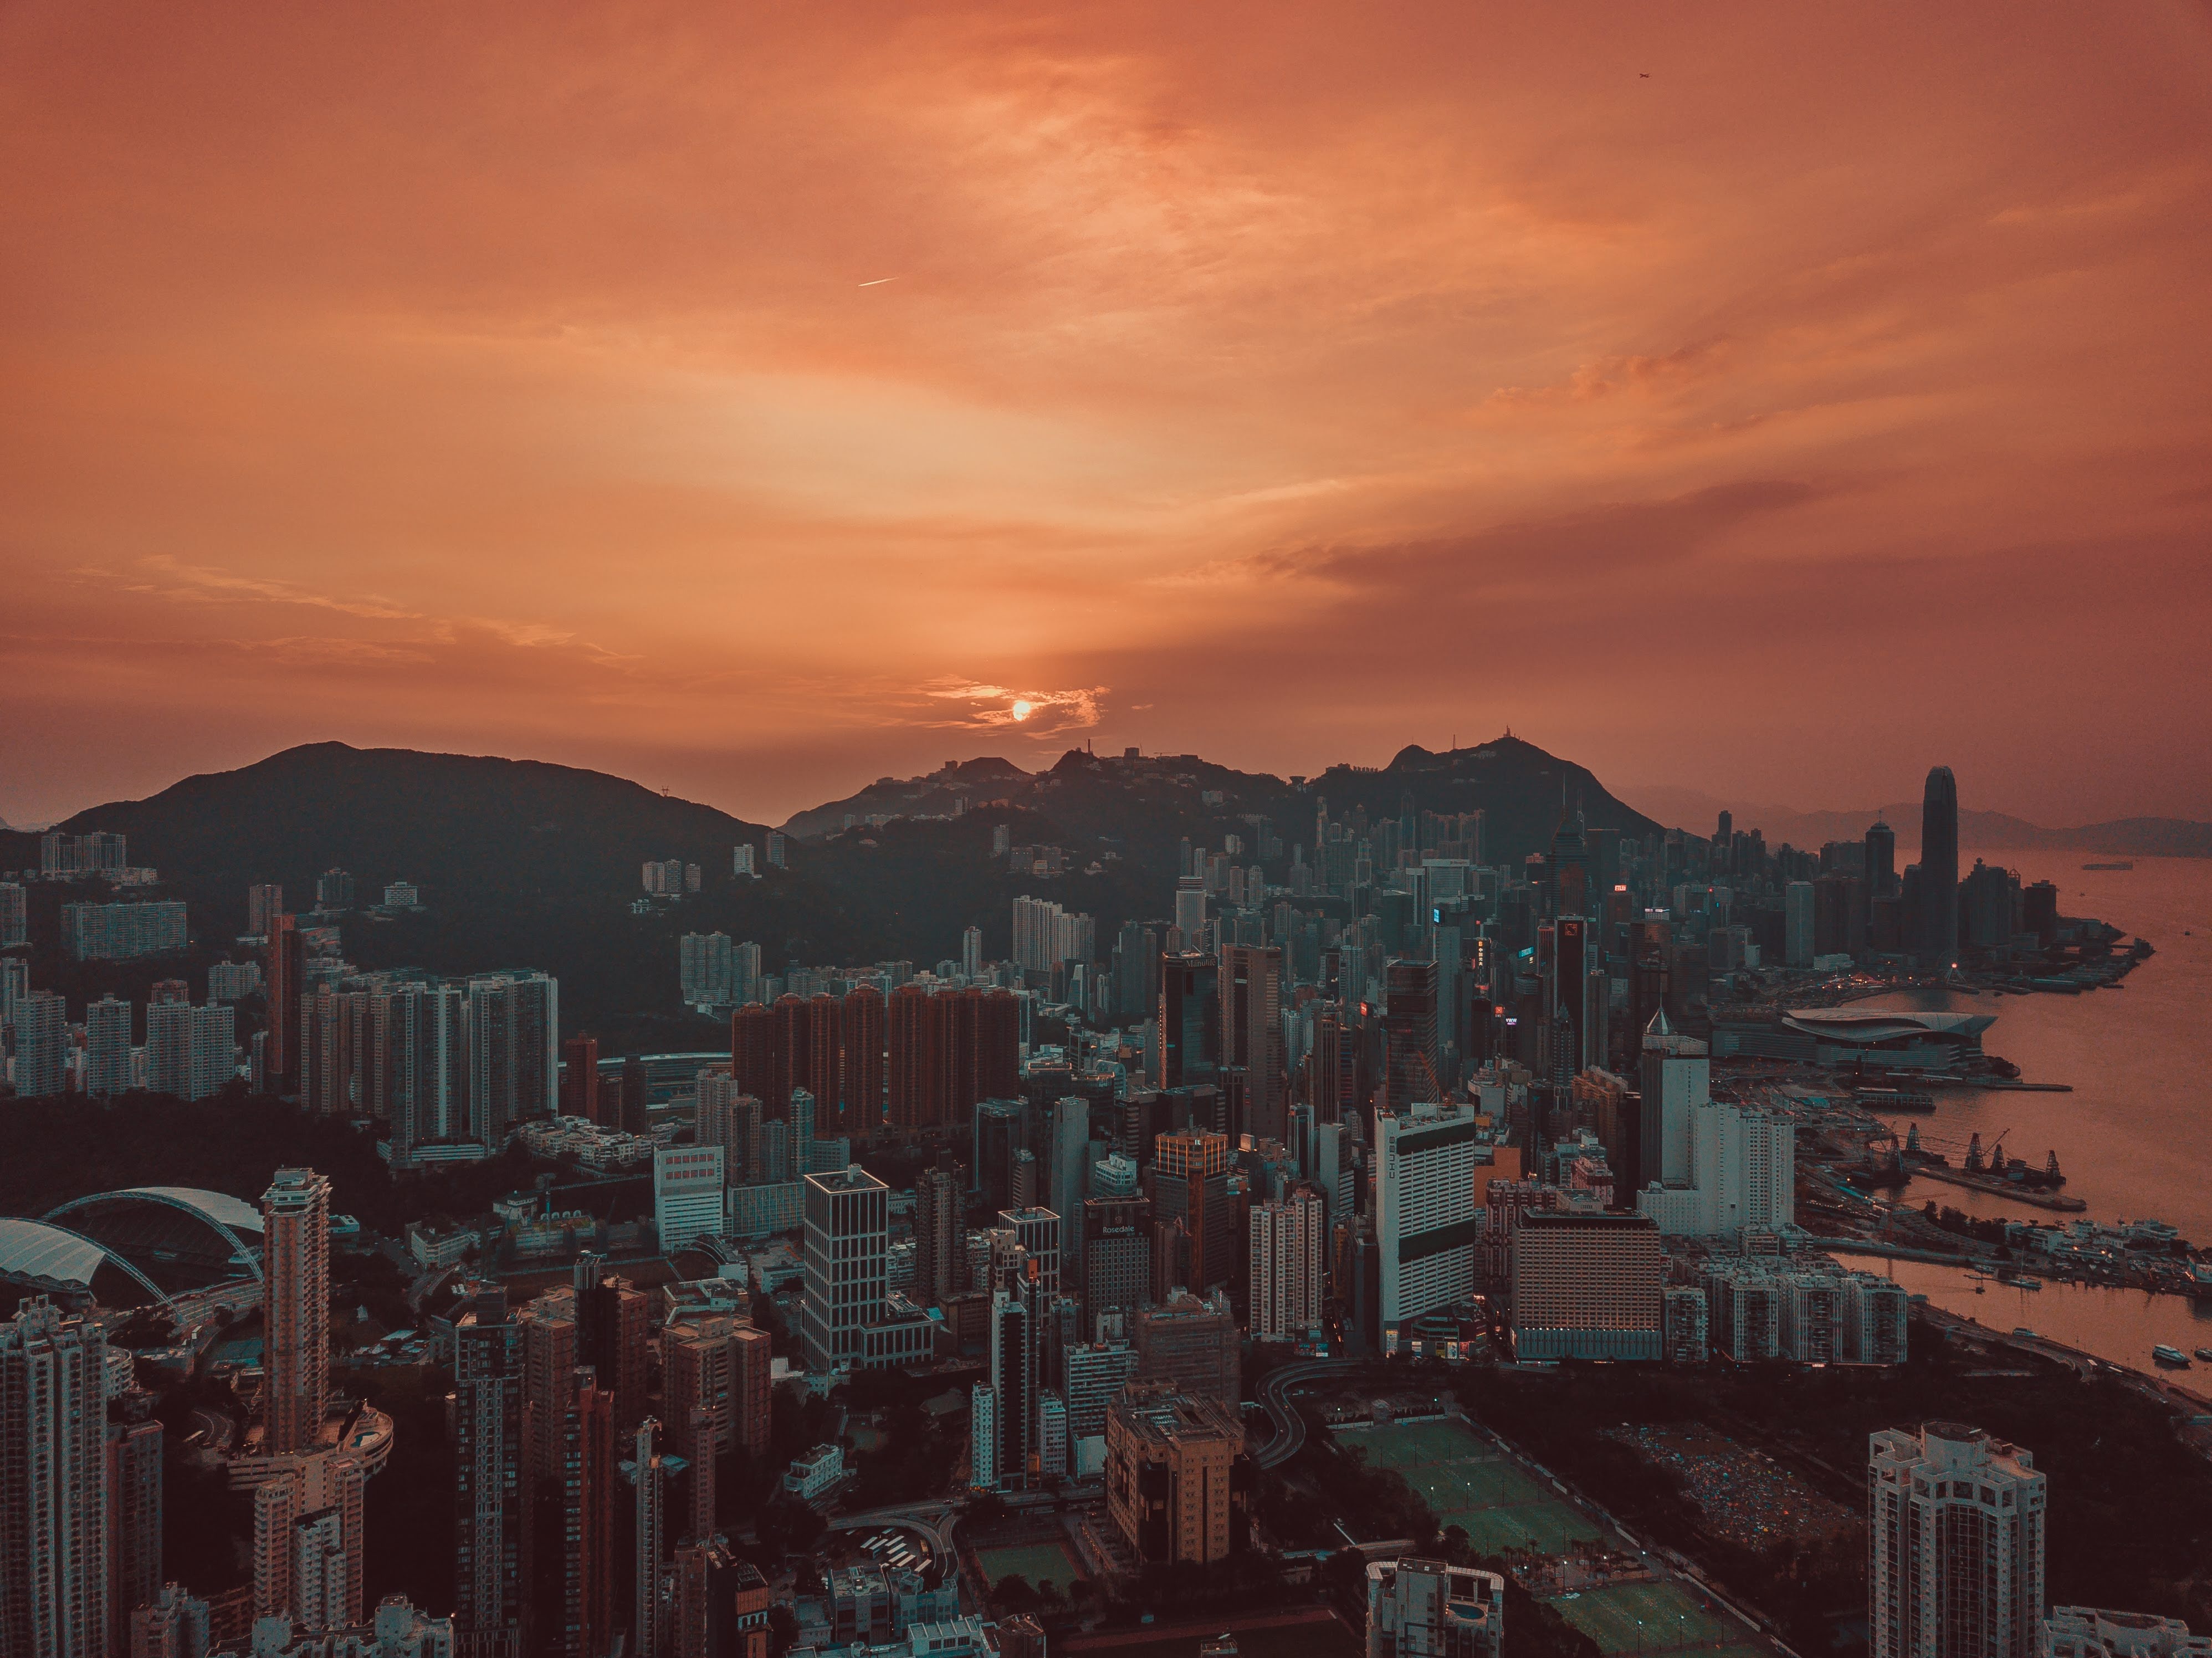 cities, sunset, sky, city, view from above, skyscrapers, hong kong, hong kong s a r